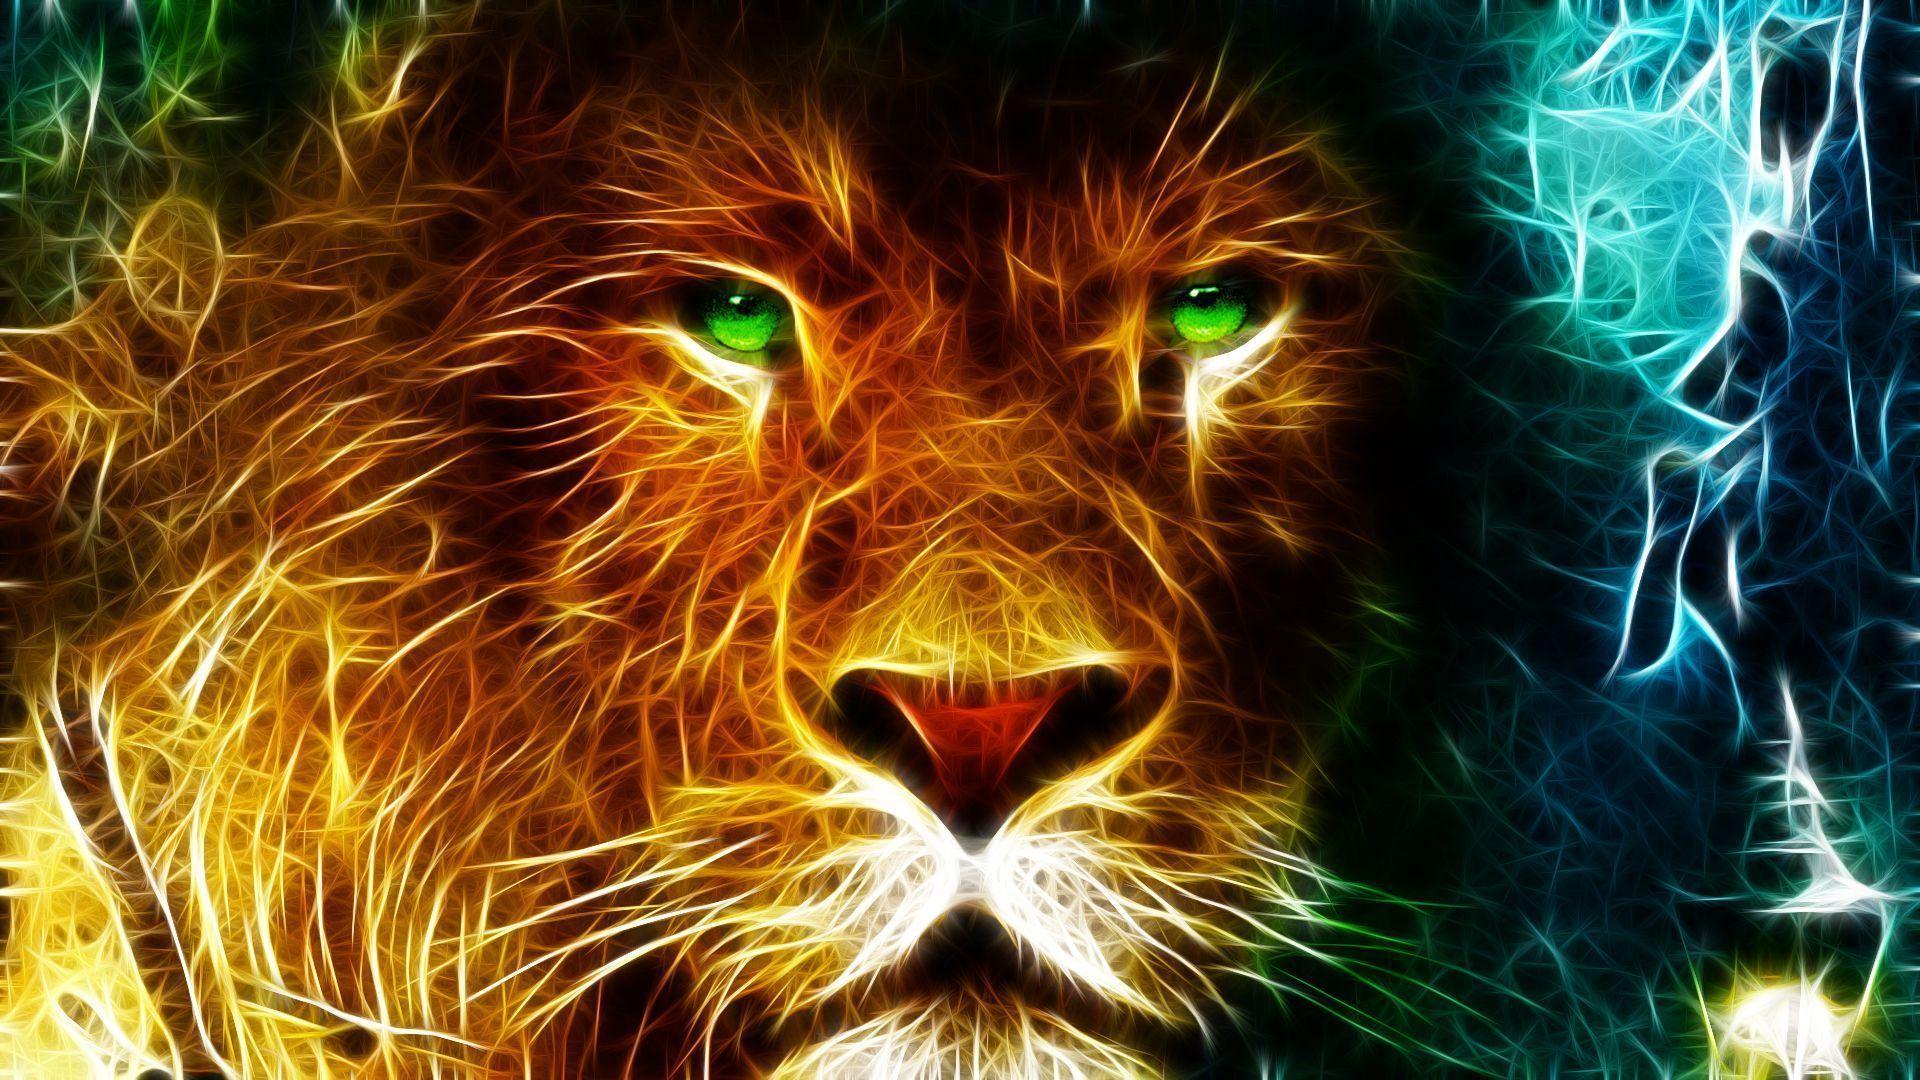 The Chronicles Of Narnia Wallpaper. The Chronicles Of Narnia